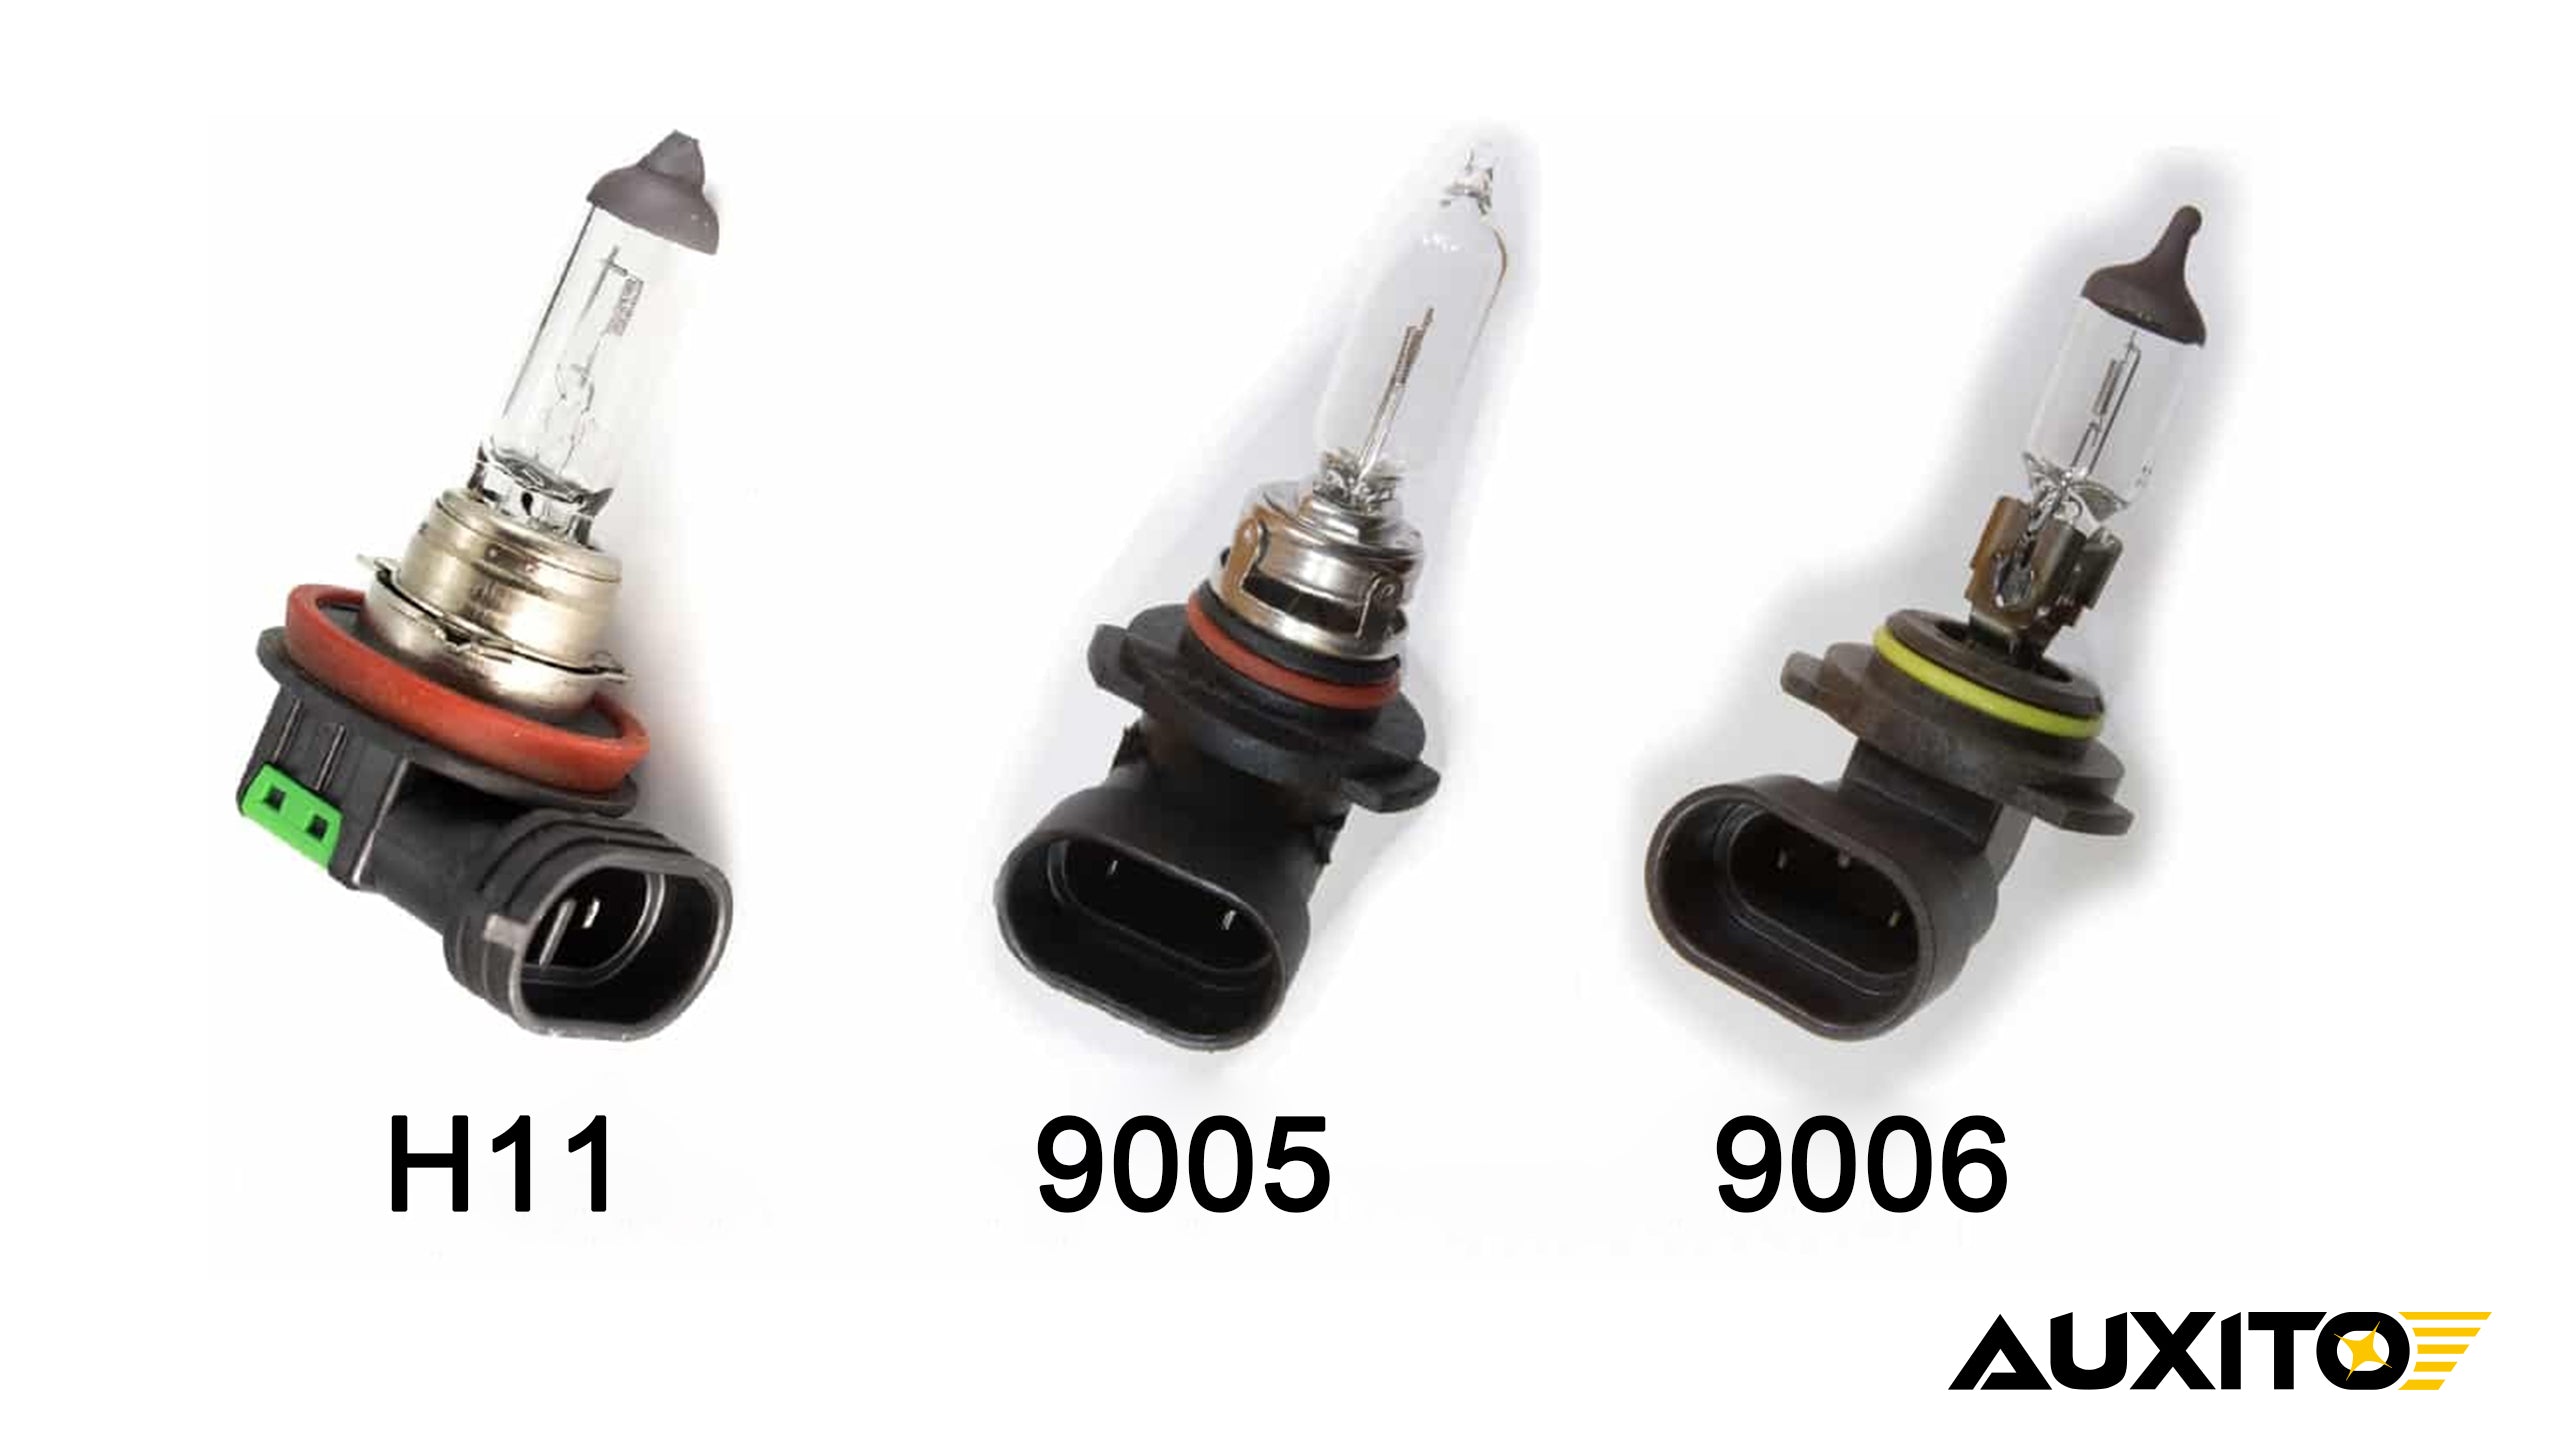 H11 vs 9005 vs 9006: Differences and Similarities of Auto Bulbs — AUXITO